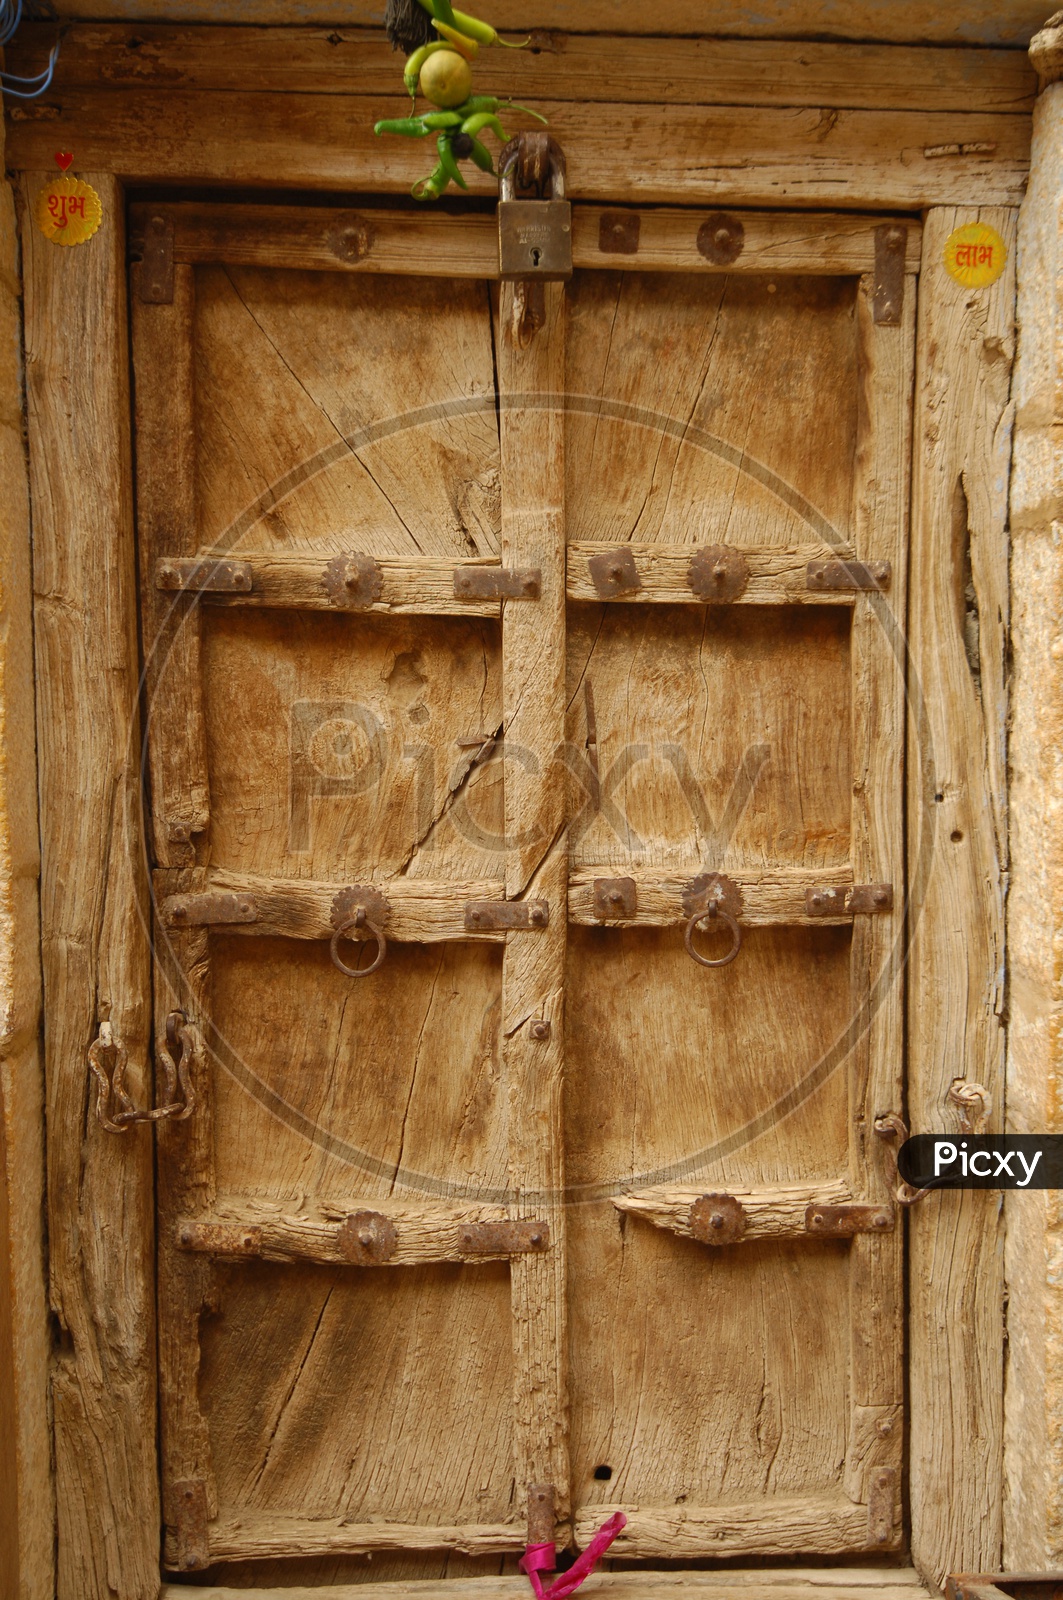 Old wooden arch door of an ancient Building